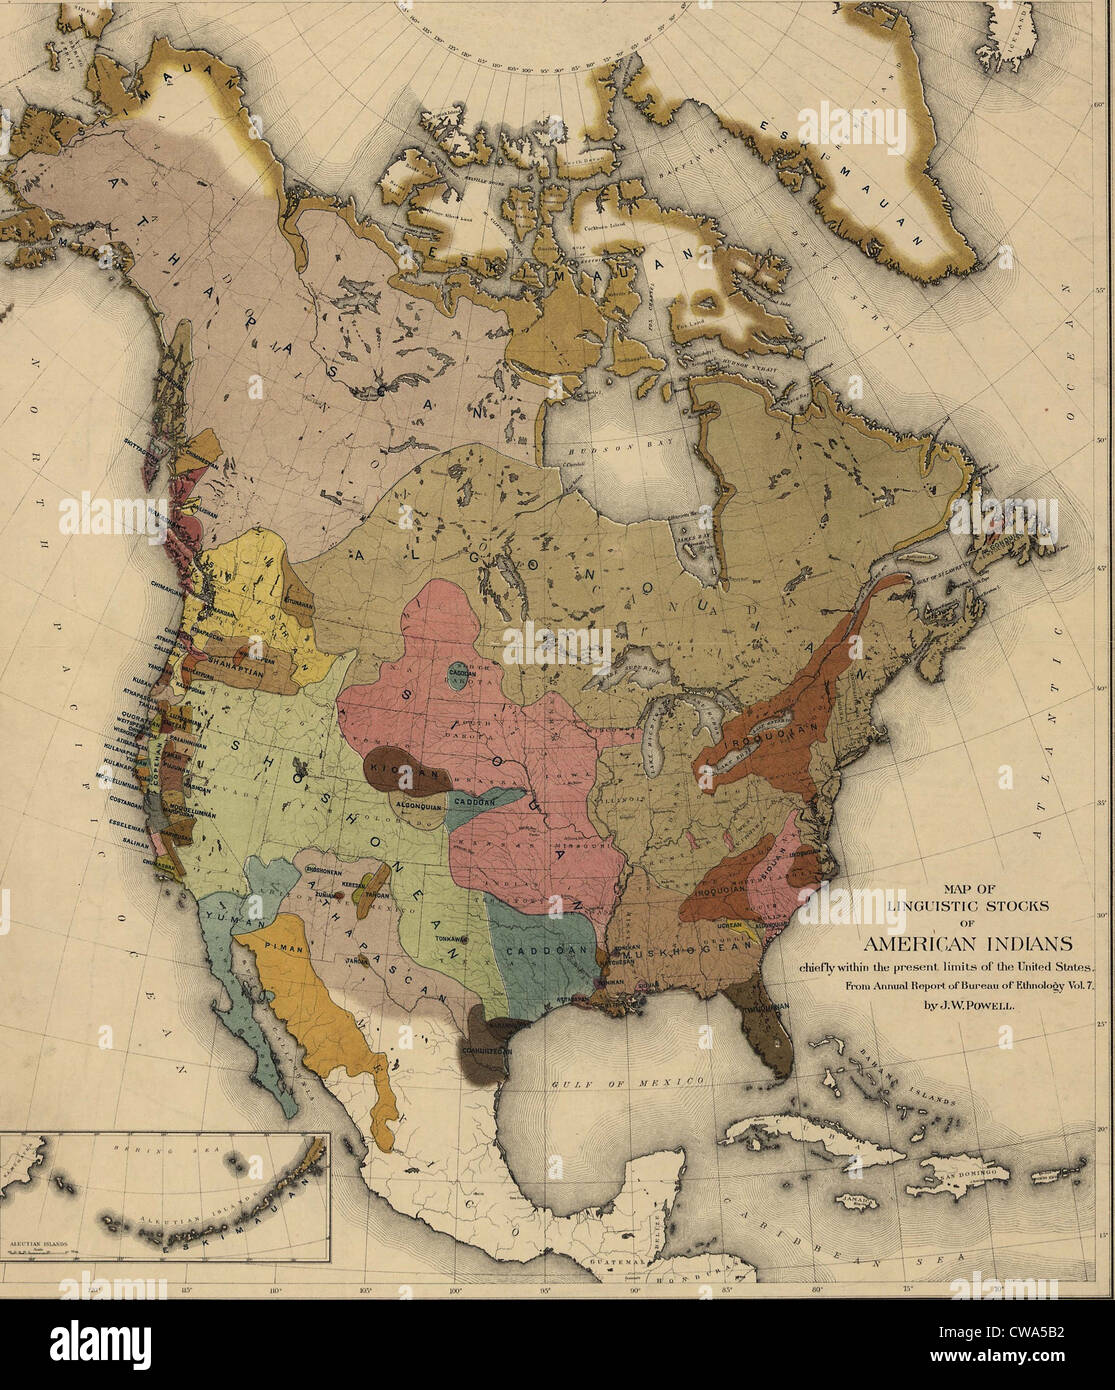 Map of linguistic stocks of American Indians by John Wesley Powell. Stock Photo